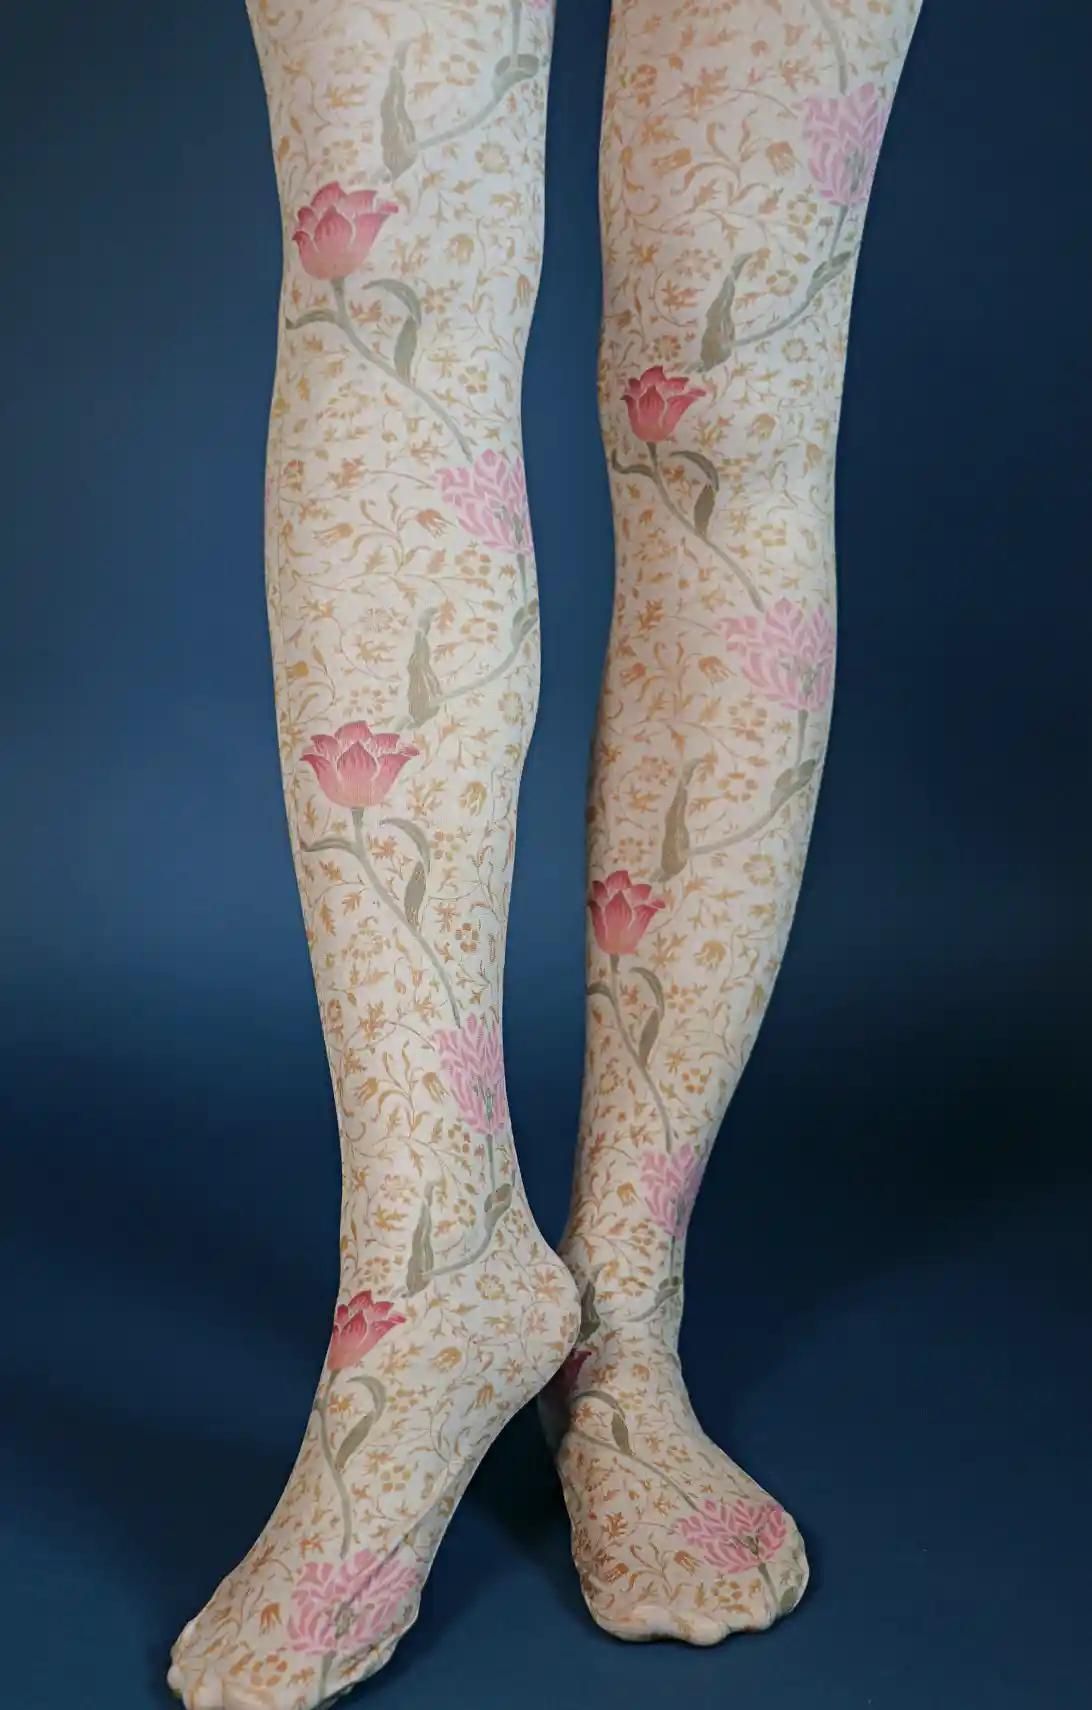 A product called Beige Medway from the William Morris collection of the TABBISOCKS brand, with an antique color pink and red flower pattern, yellowish beige in color overall